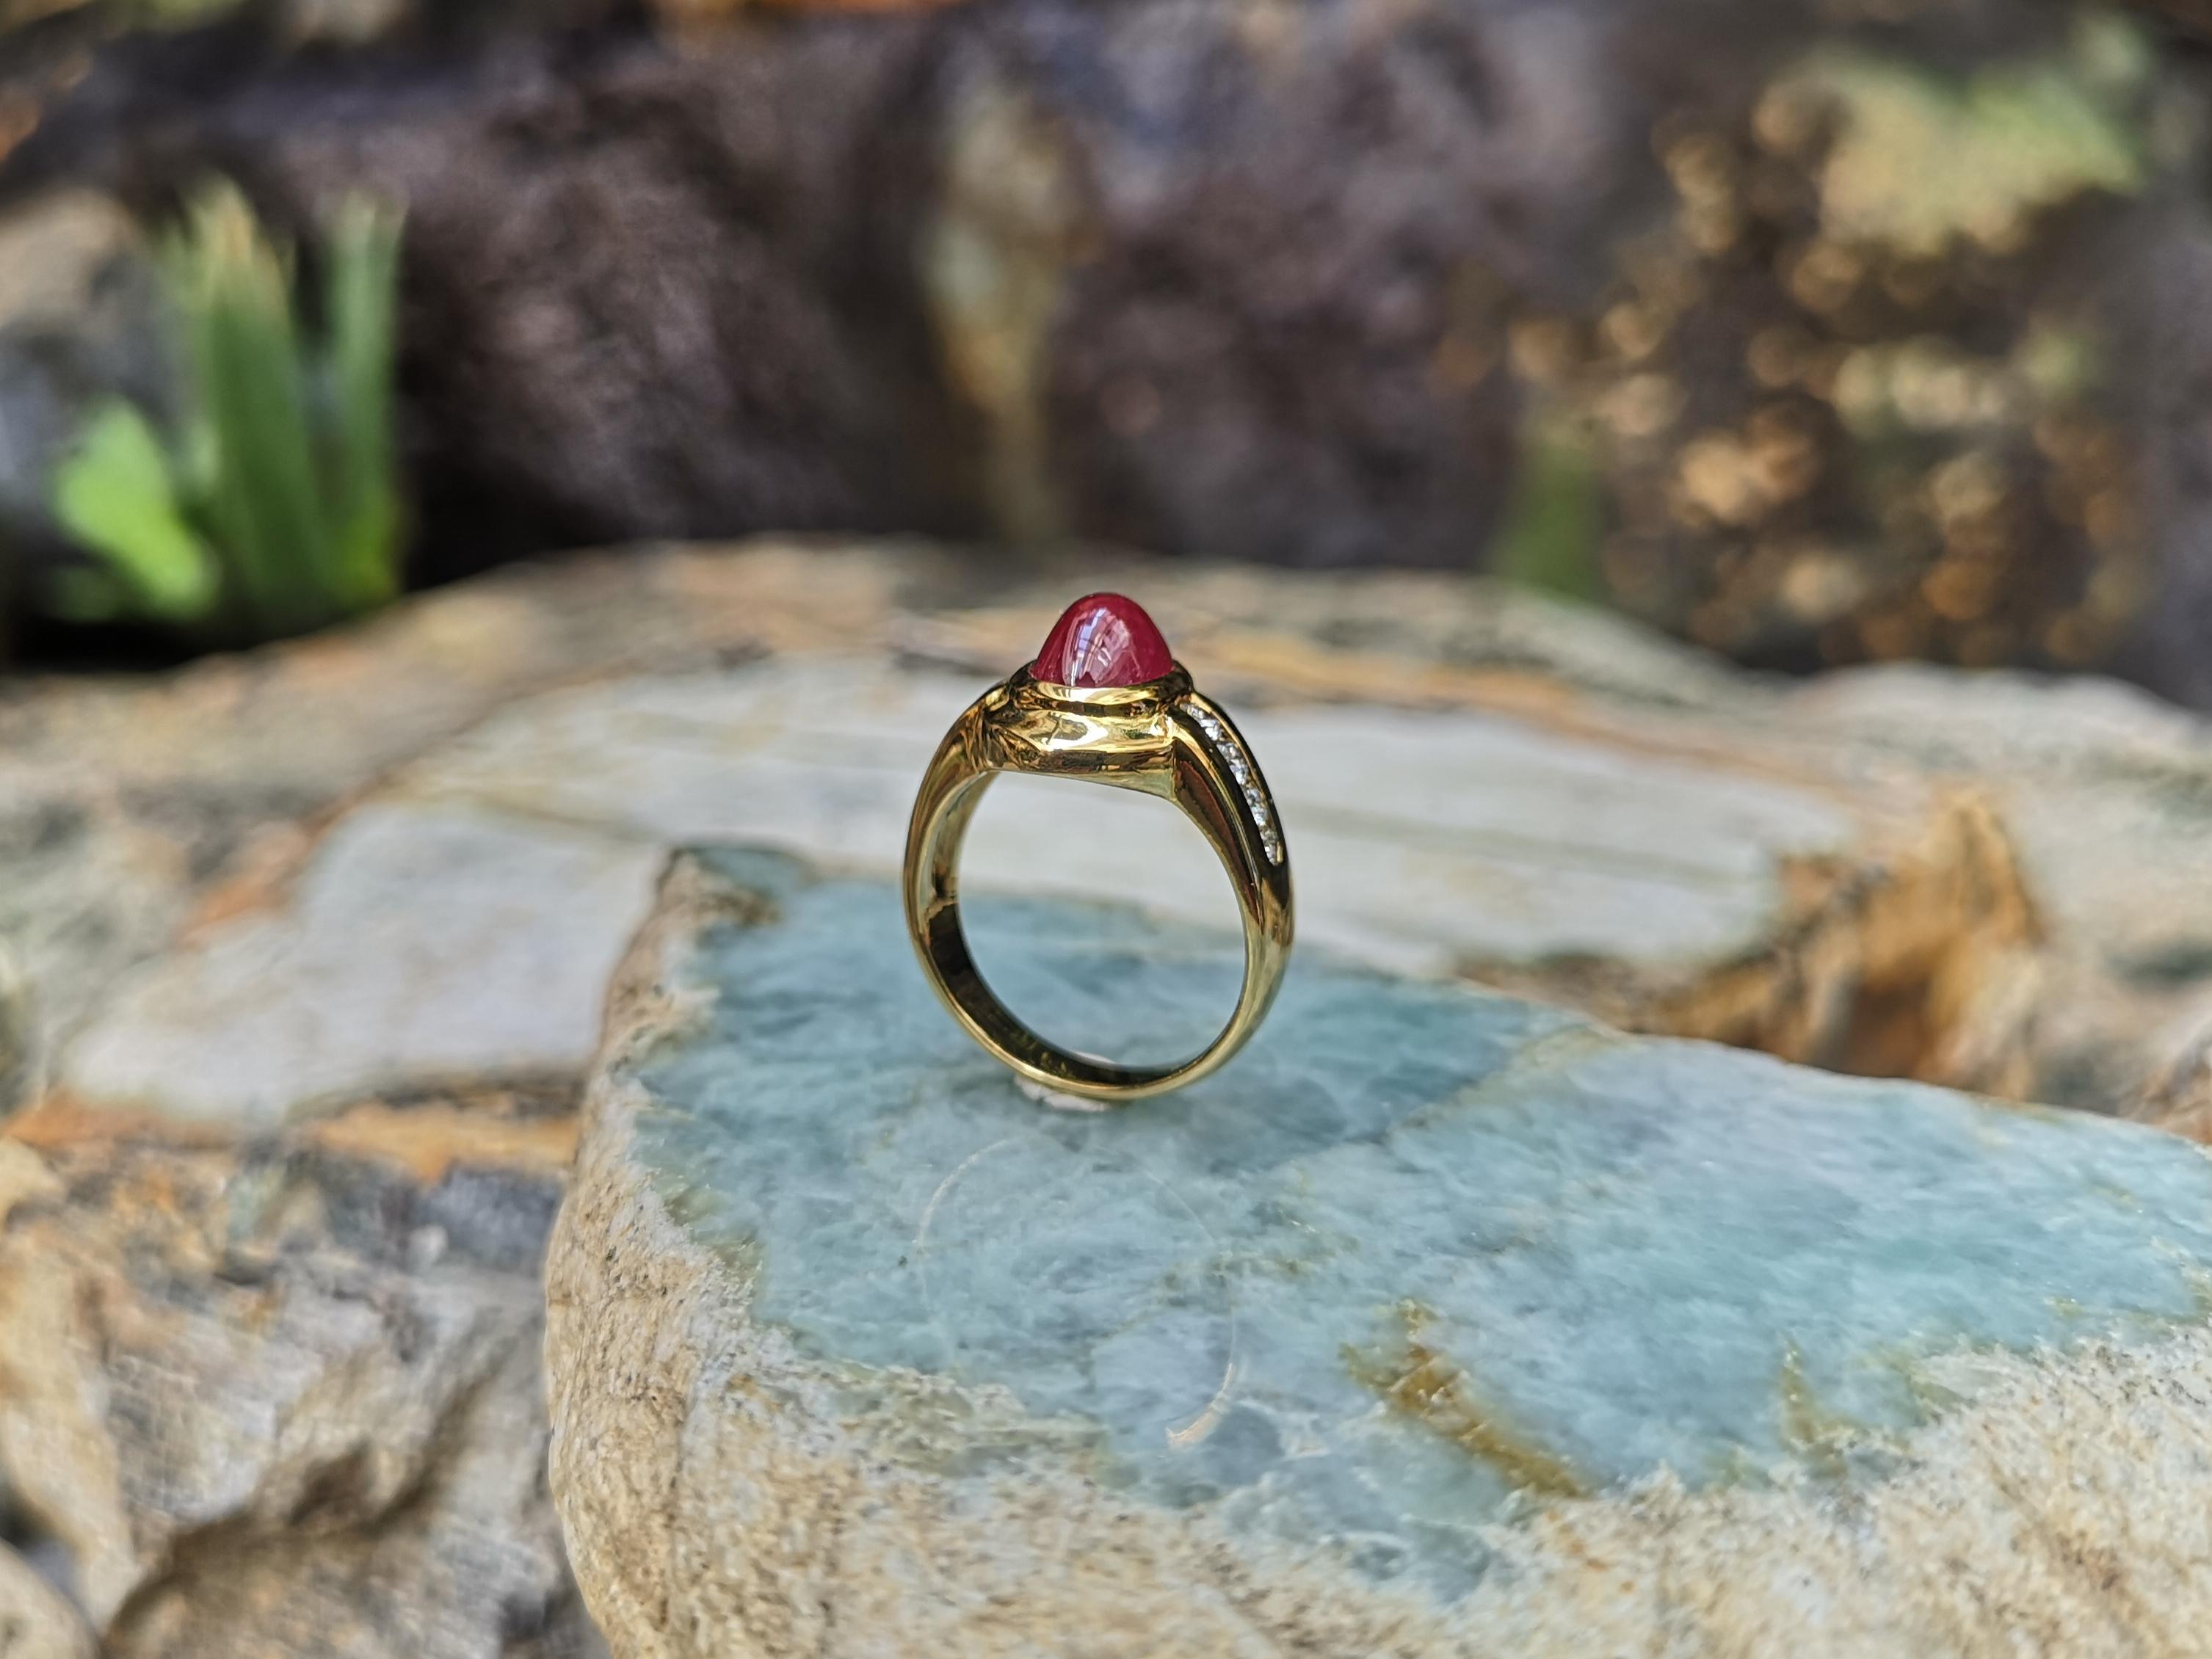 Cabochon Ruby with Diamond Ring Set in 18 Karat Gold Settings 5